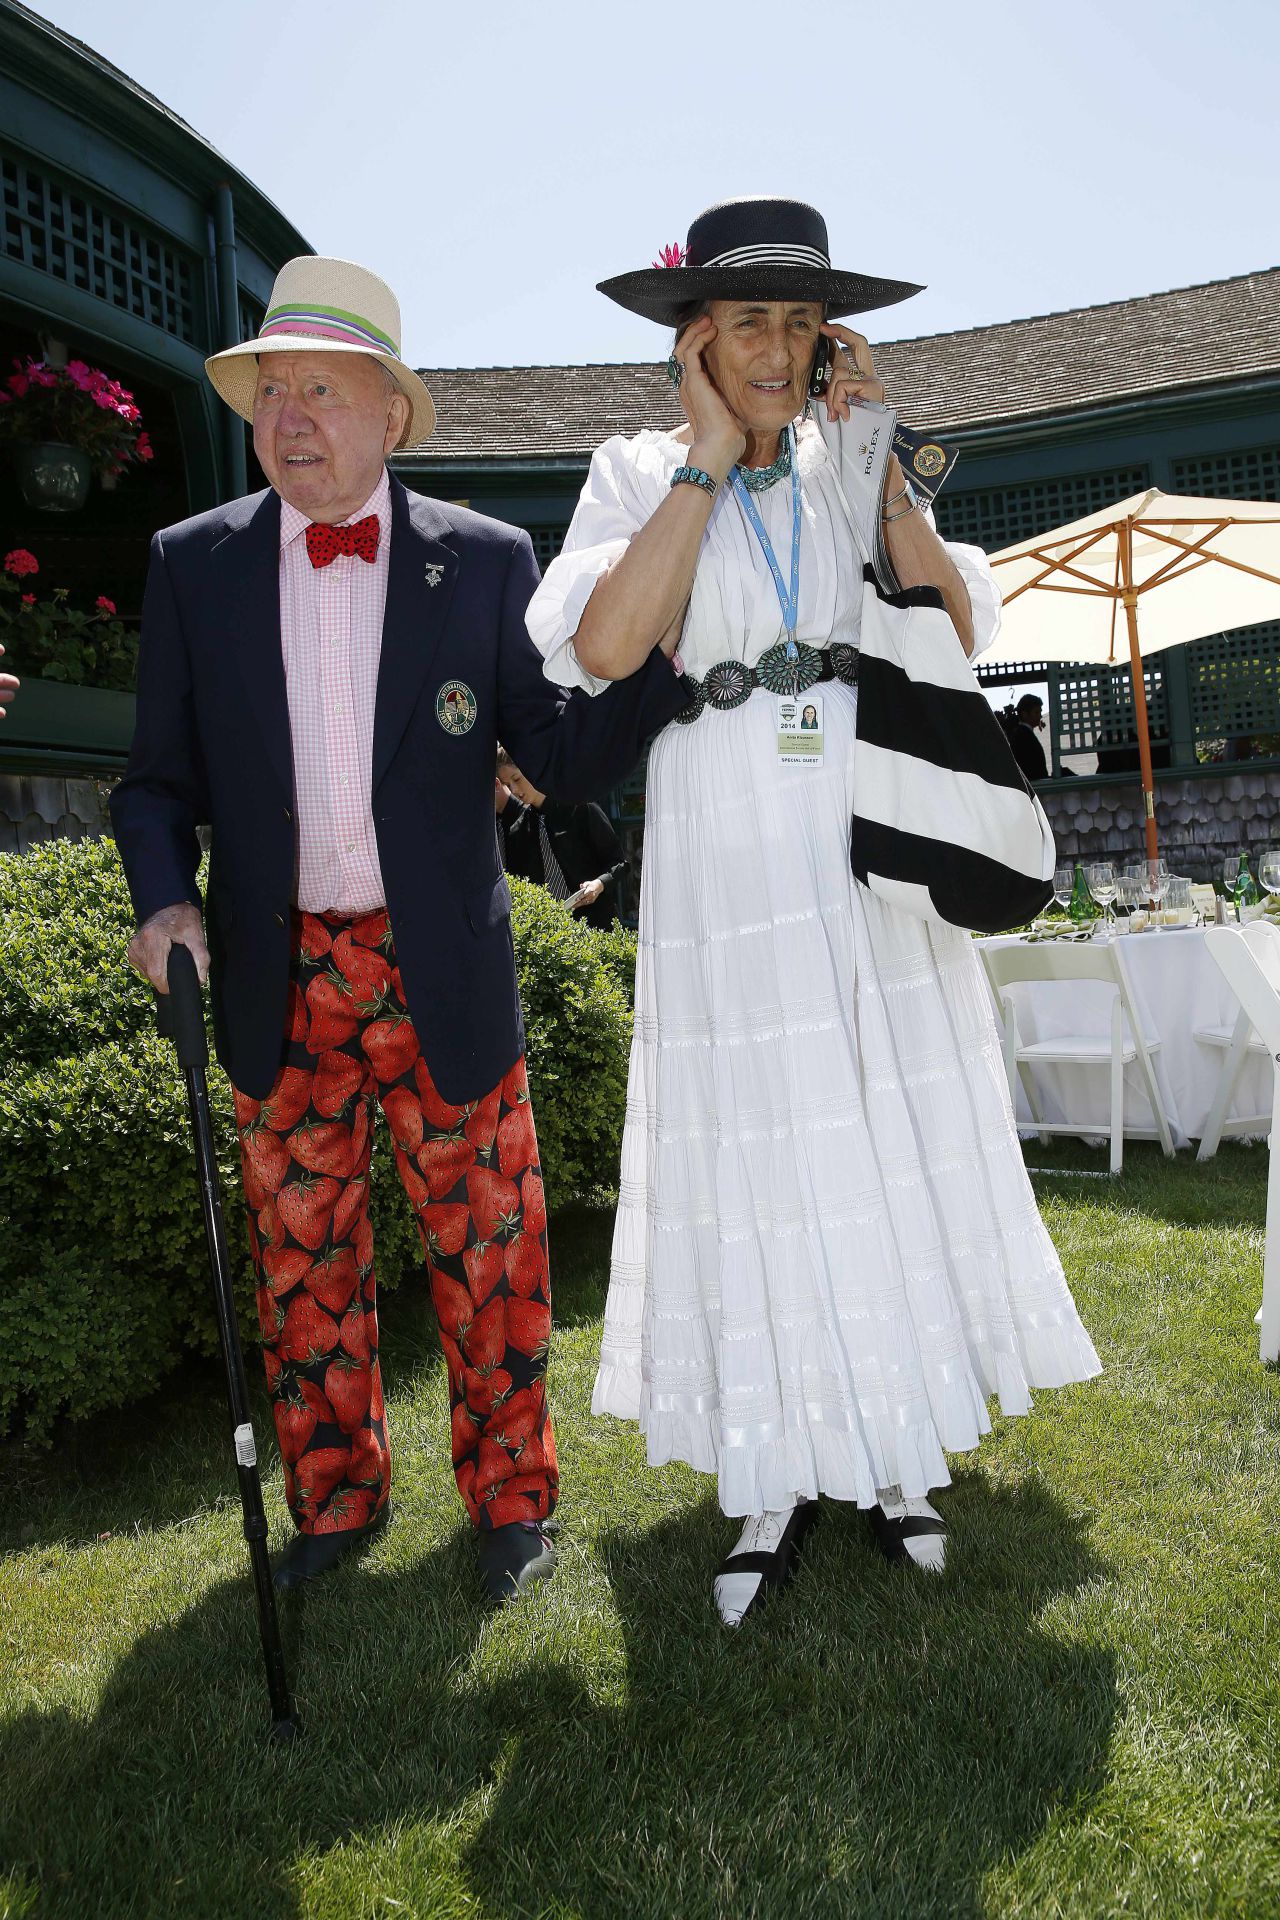 Bud Collins and his wife Anita Klaussen. (Michael Dwyer/AP)